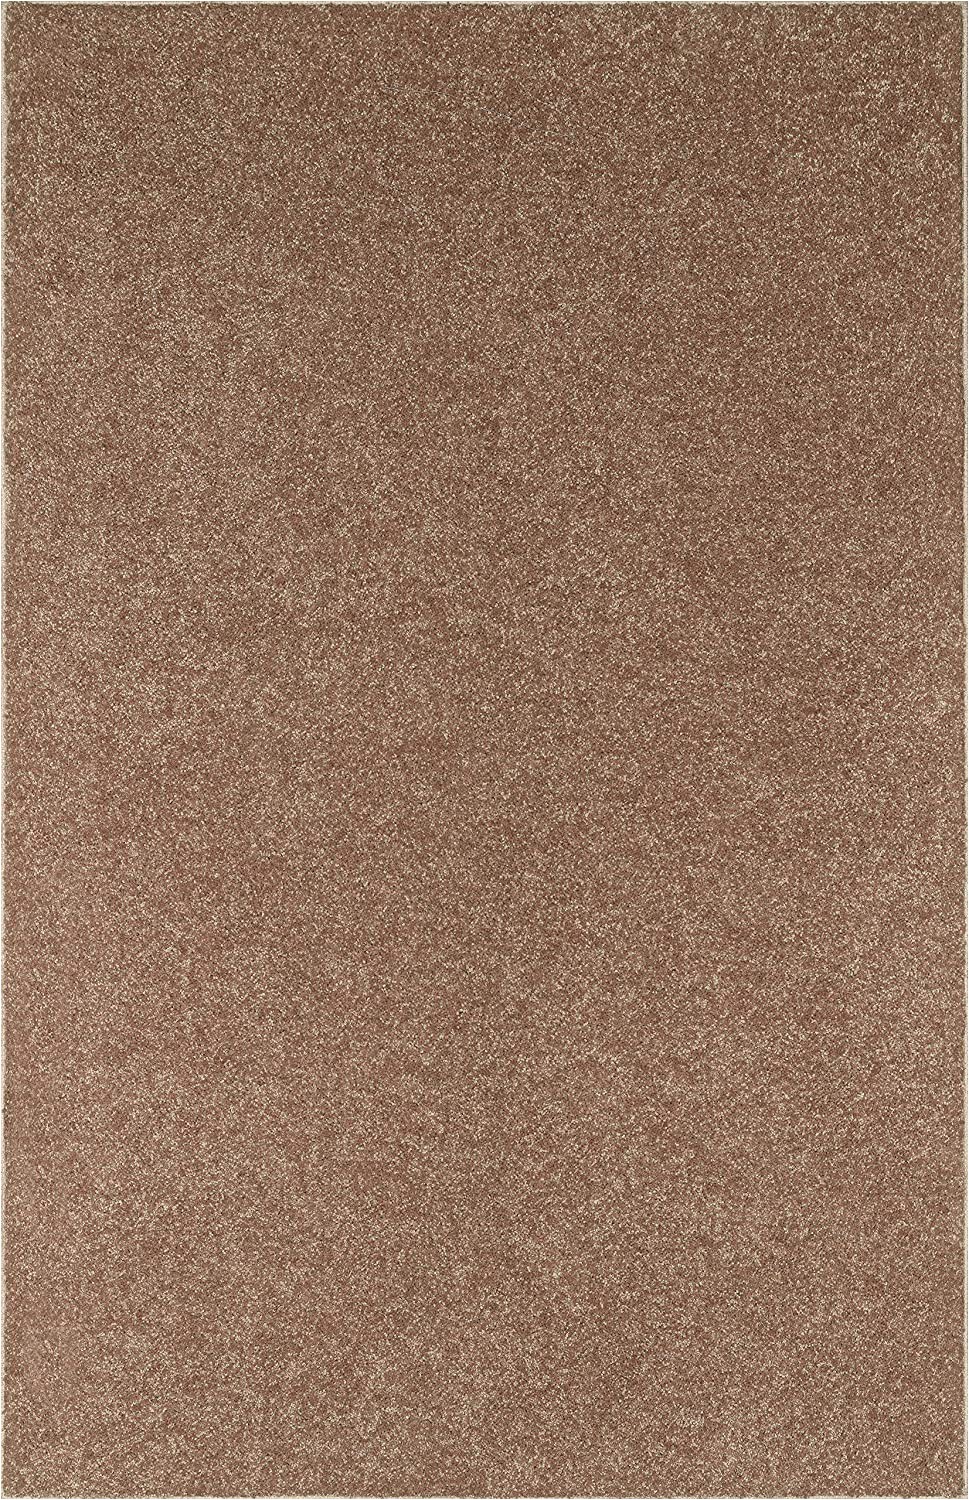 Cheap solid Color area Rugs Ambiant solid Color Oversize area Rug Brown 7 X 13